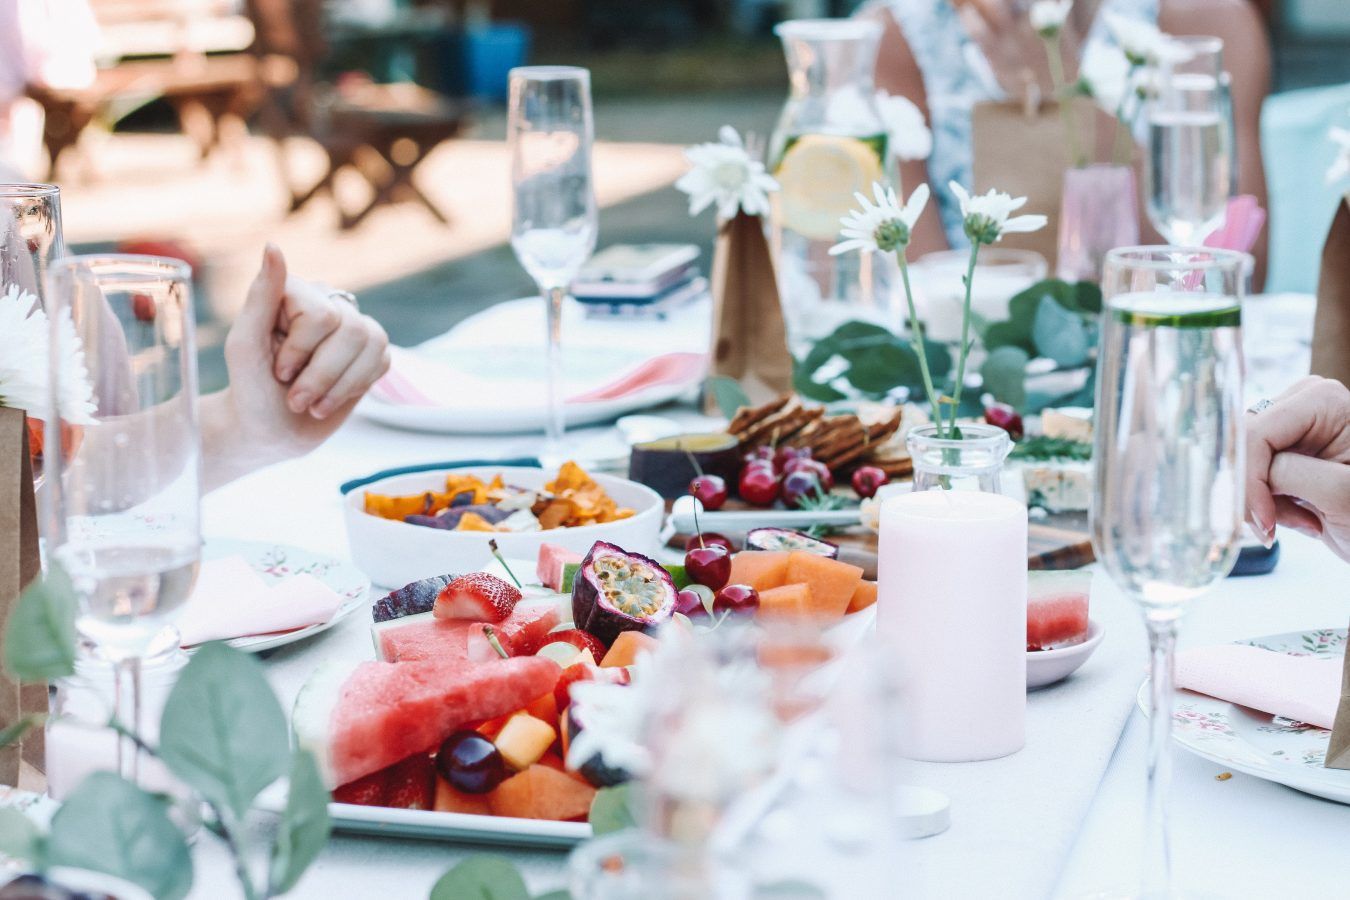 3 Tips For Hosting Summer Soirees in Your Home This Season